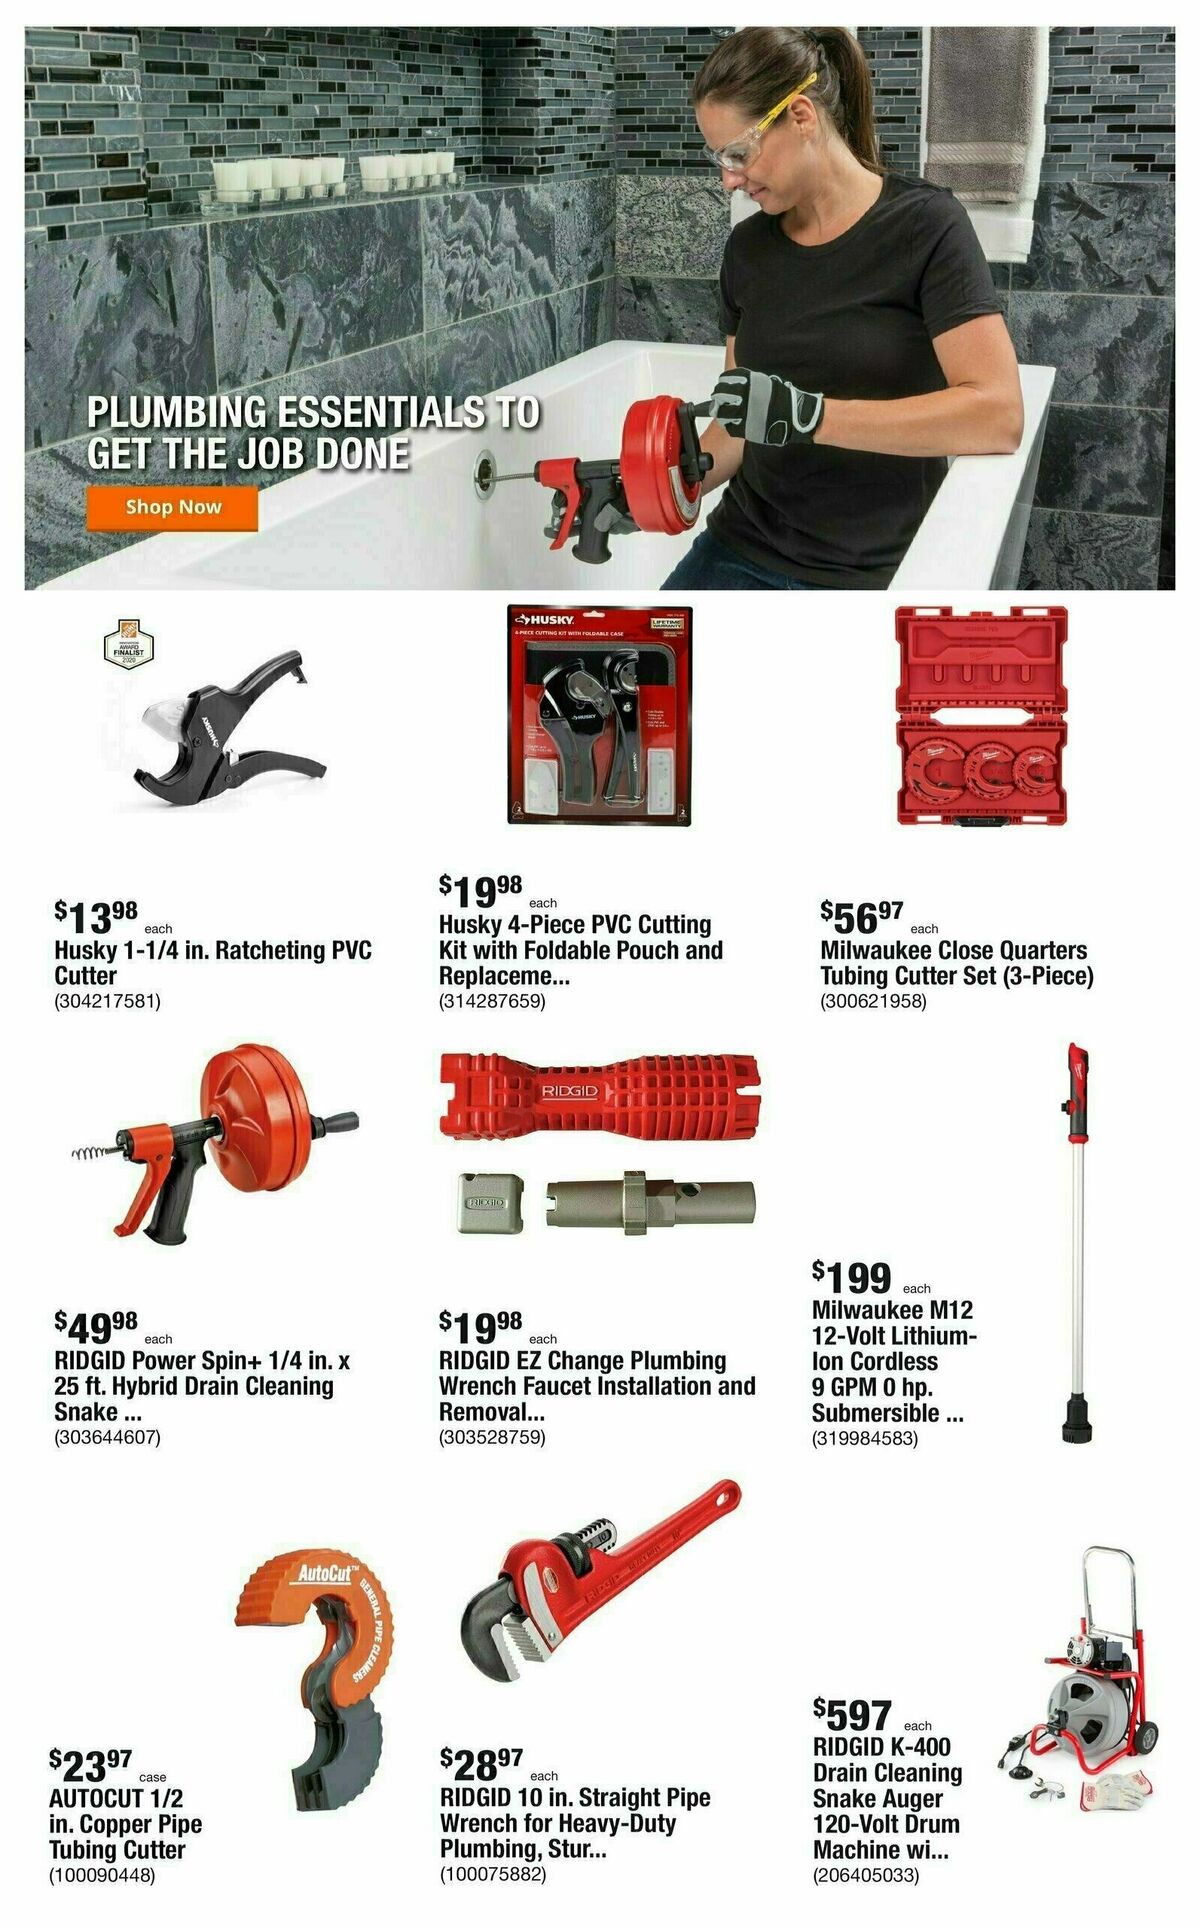 The Home Depot PRO Weekly Ad from February 5